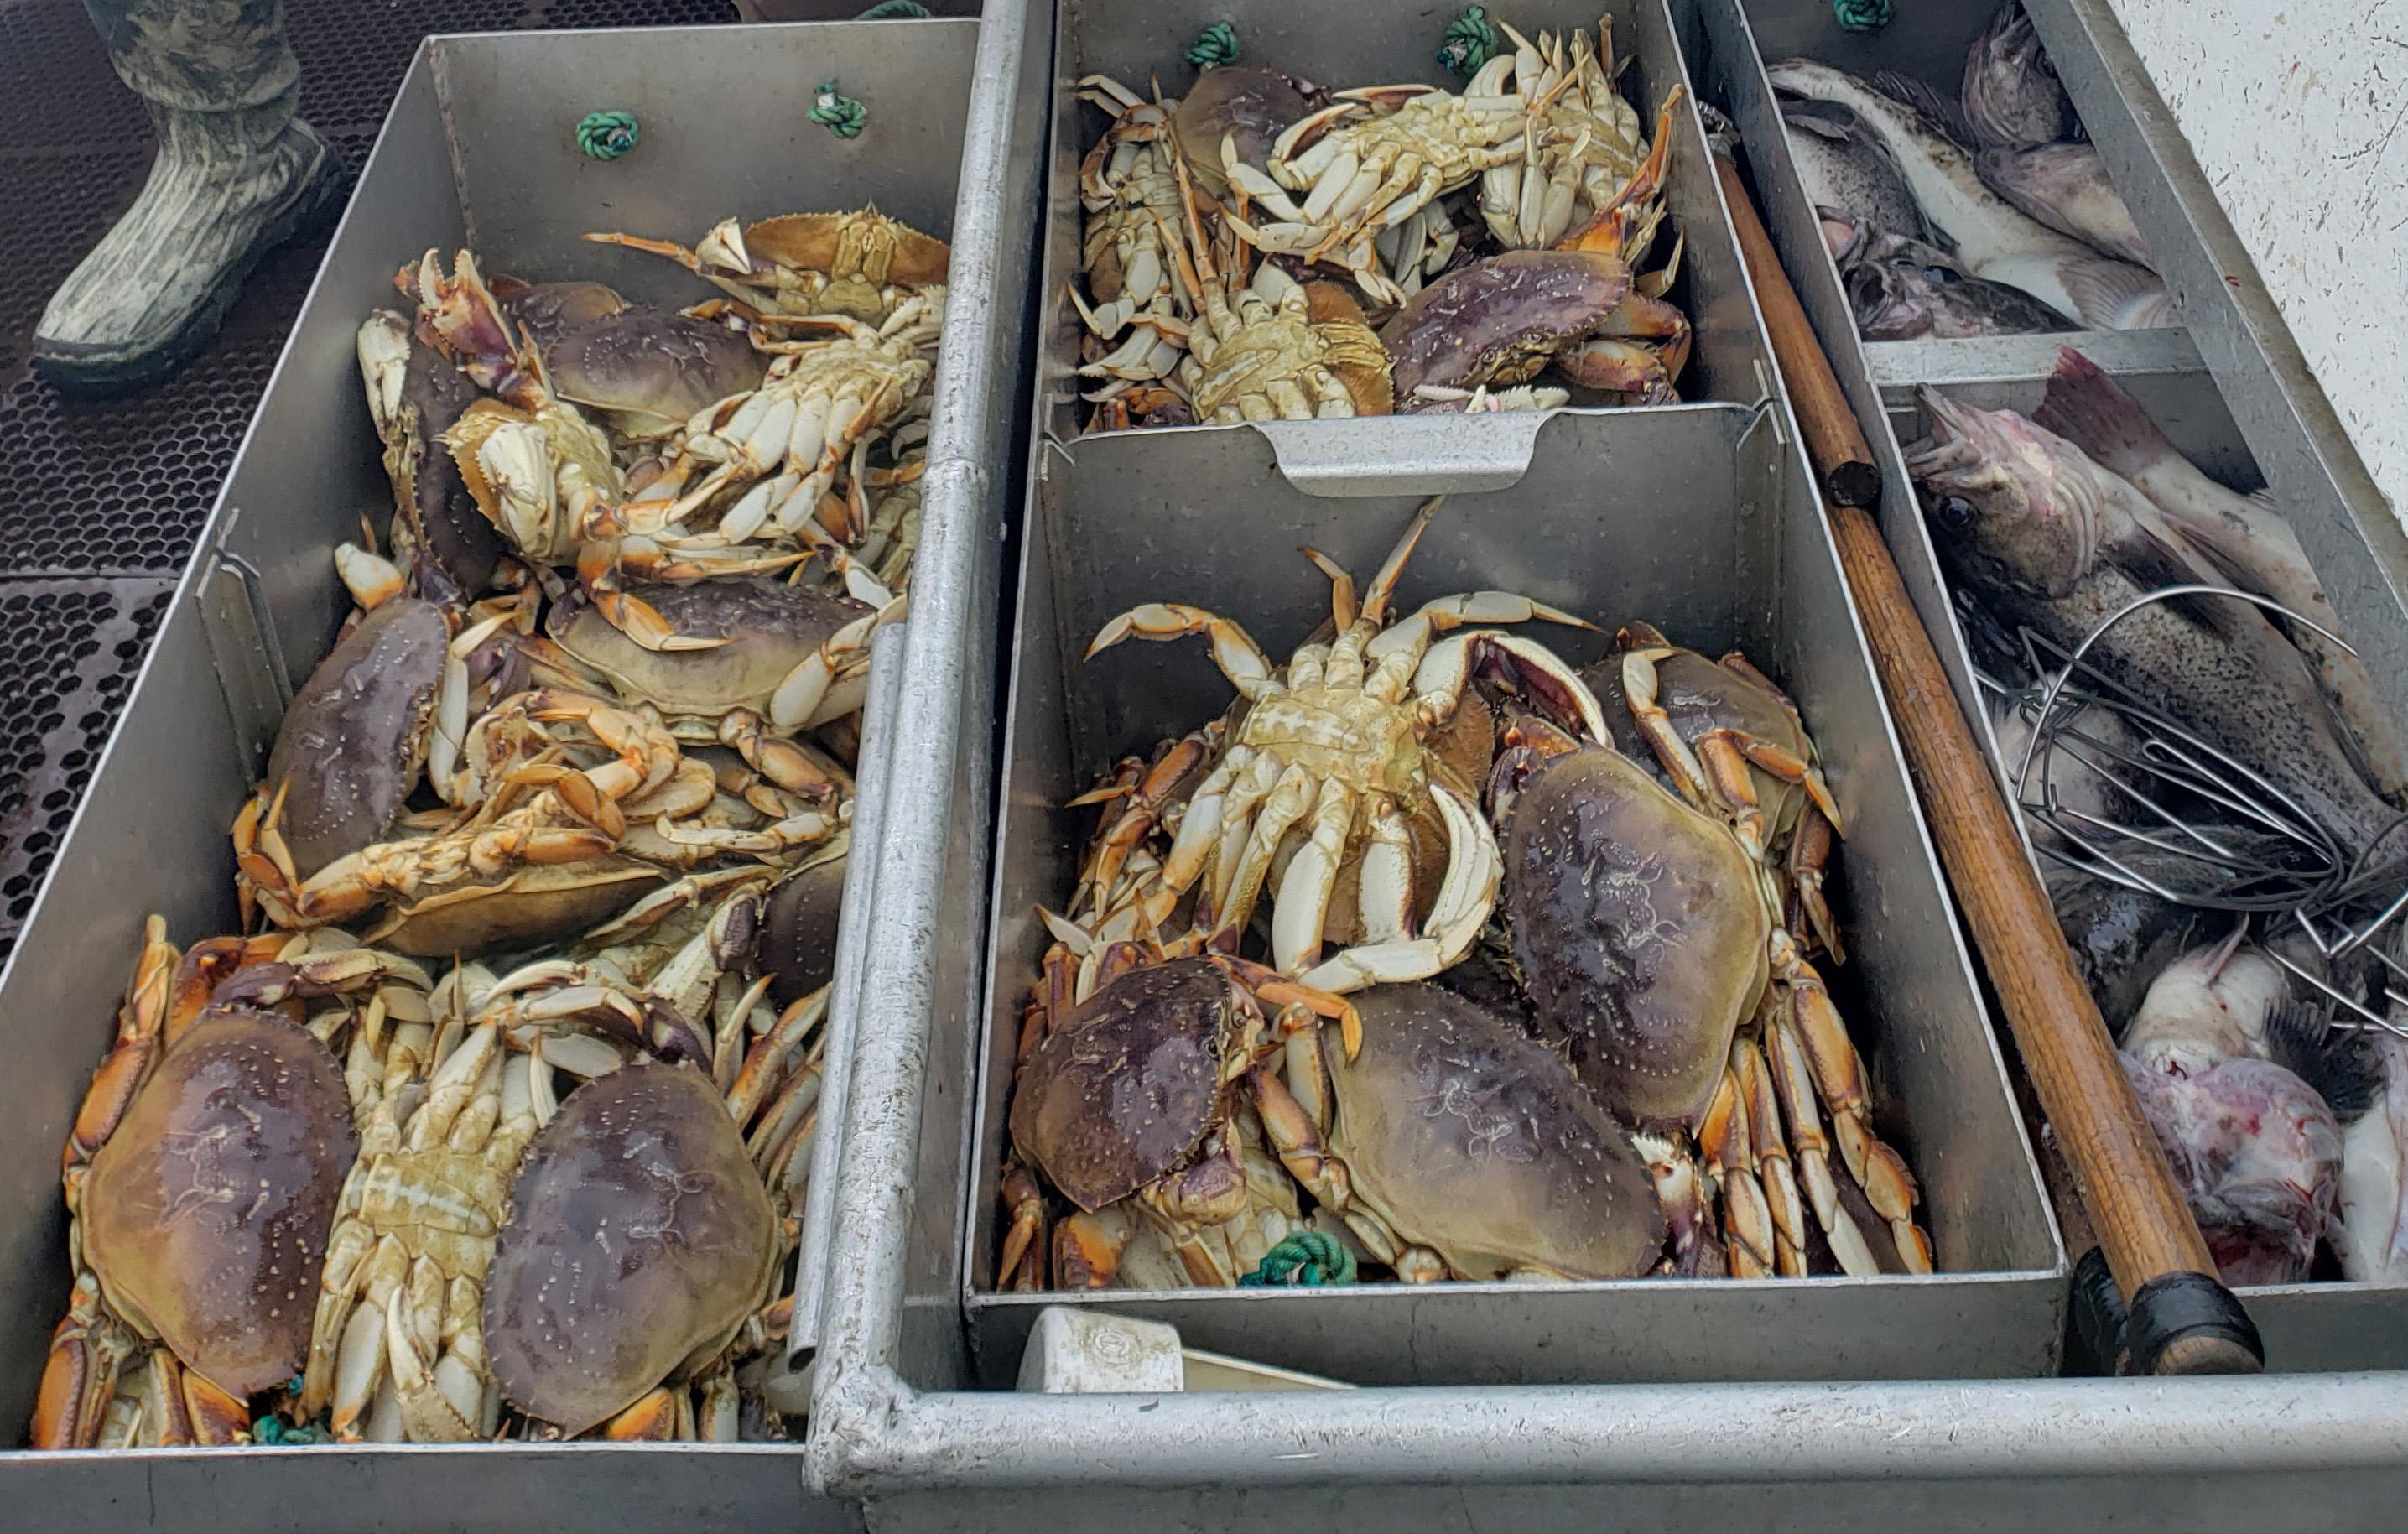 Oregon commercial Dungeness crabbing season to open Jan. 15 after weekslong  delay - OPB